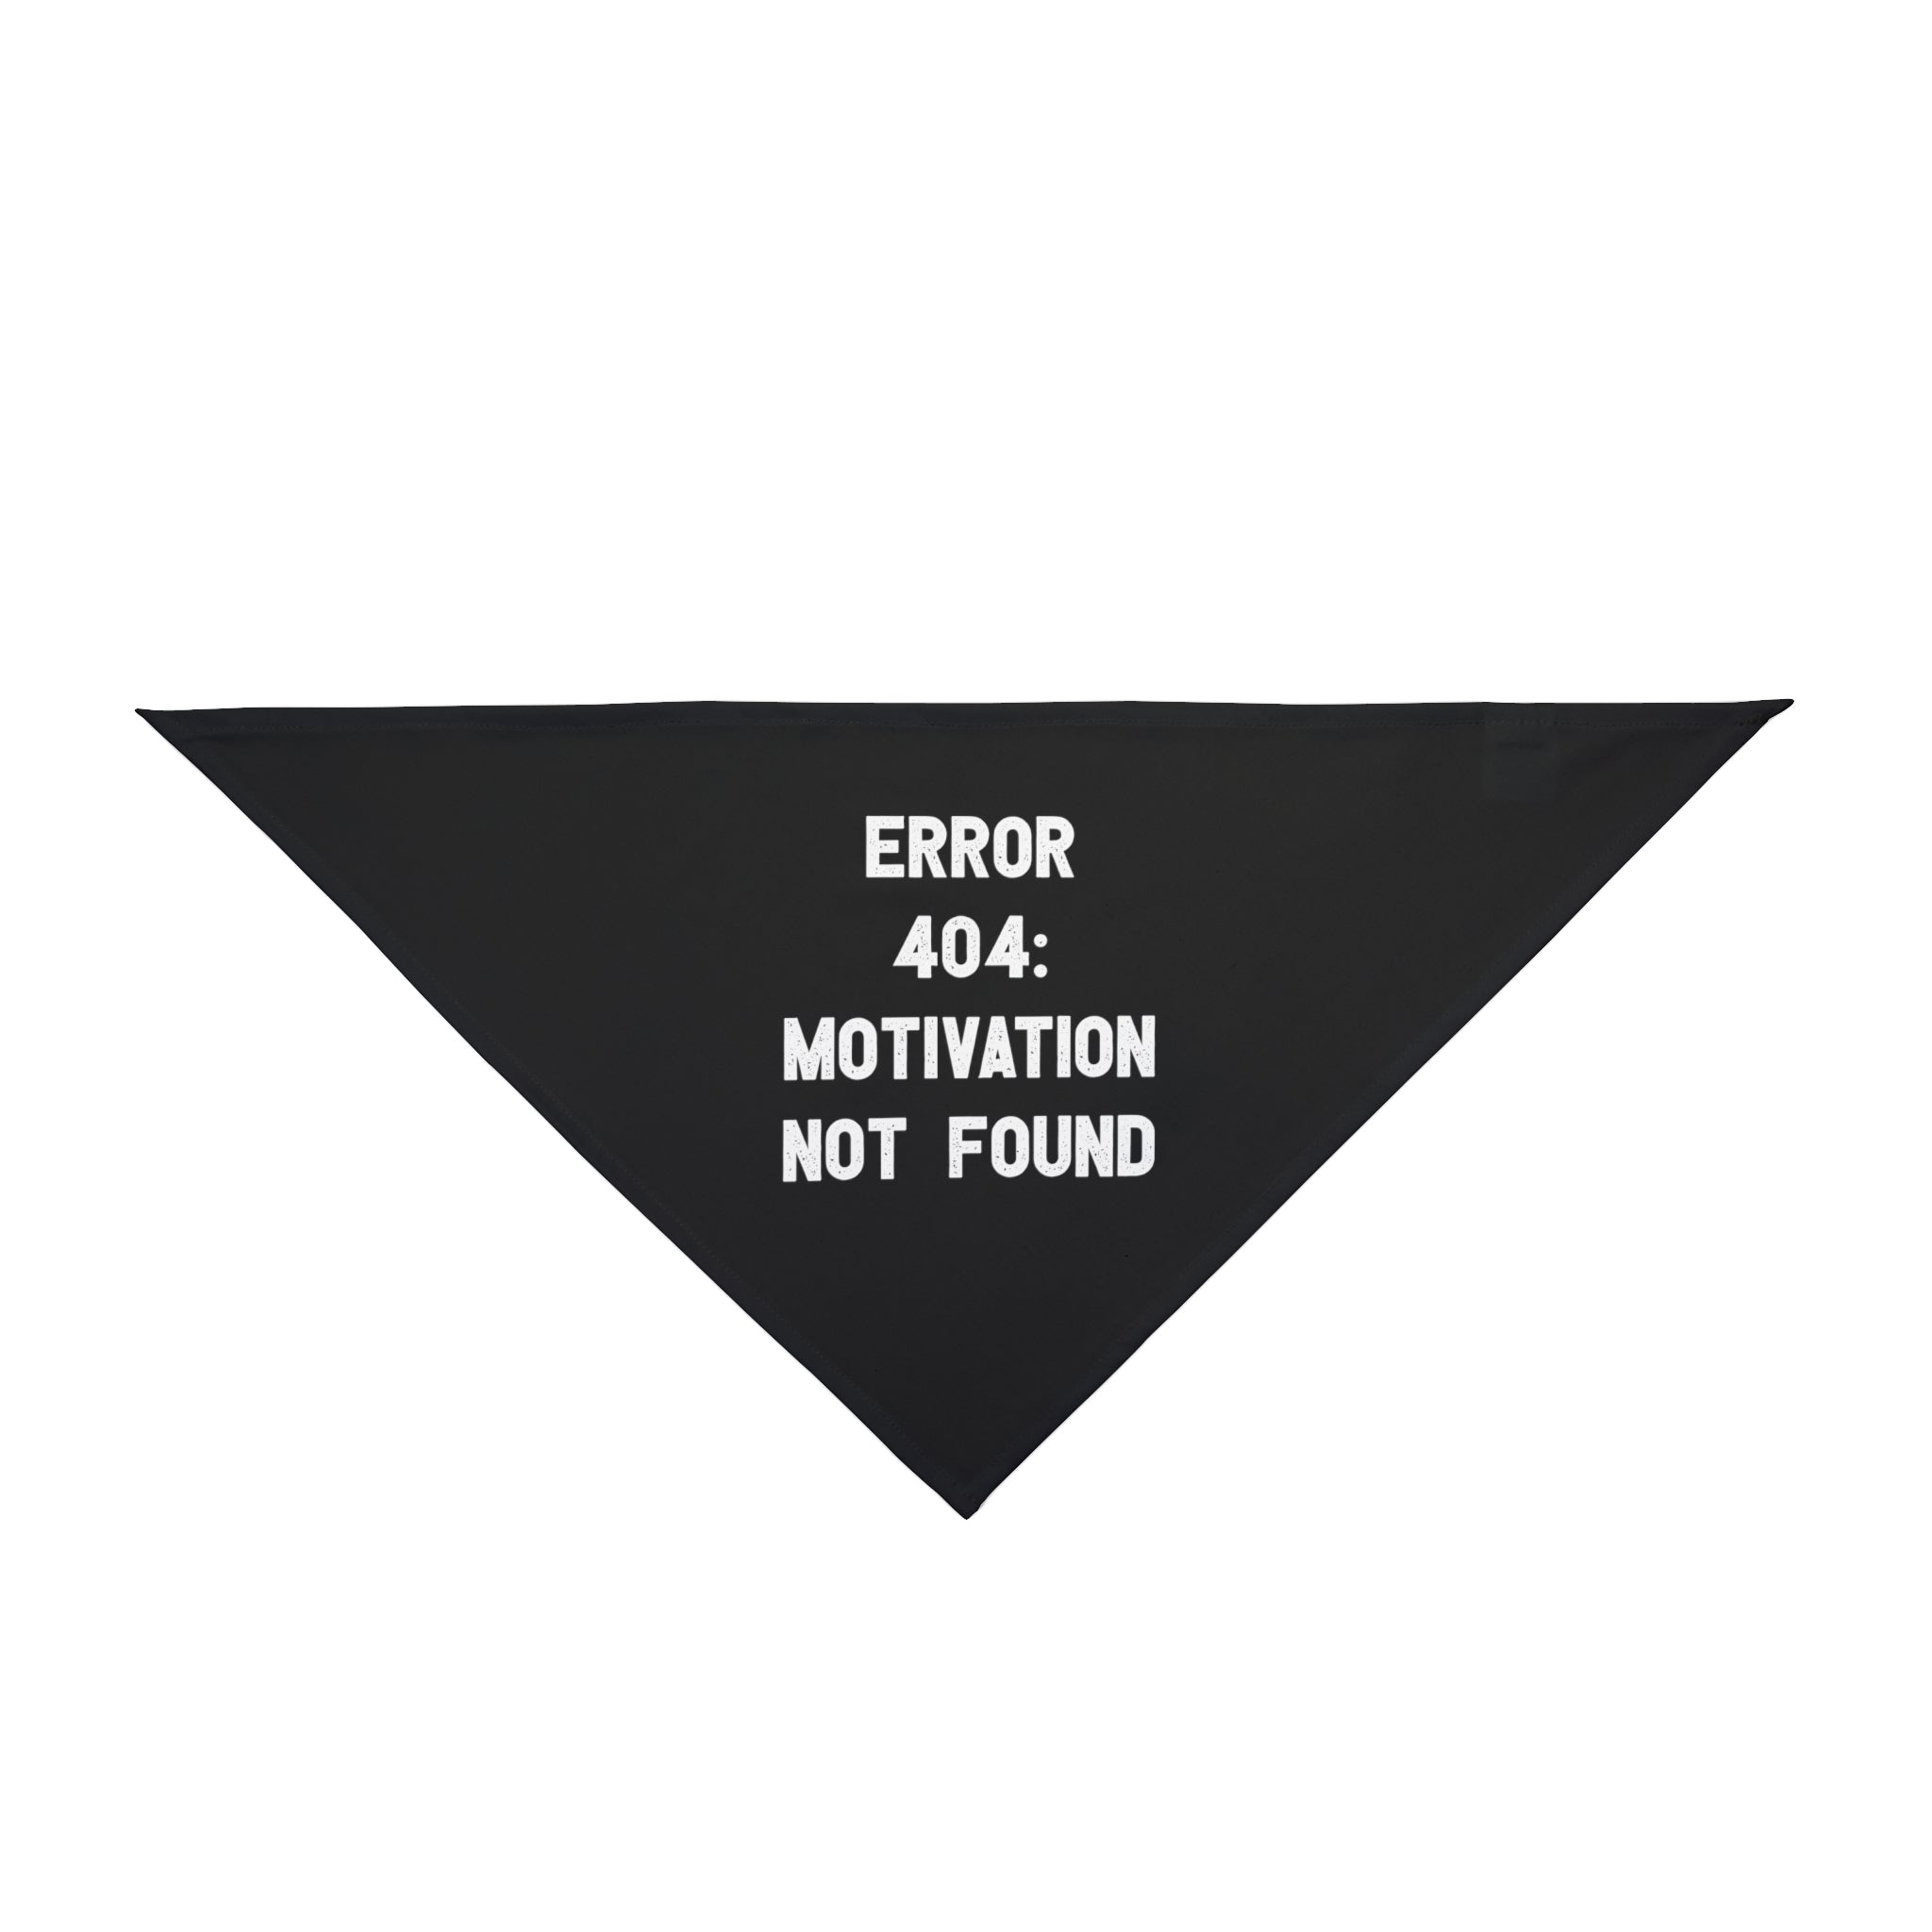 Black triangular cloth, made from soft-spun polyester, with the text "ERROR 404: MOTIVATION NOT FOUND" printed in white. This pet-friendly comfort item is perfect as an Error 404: Motivation not found - Pet Bandana.